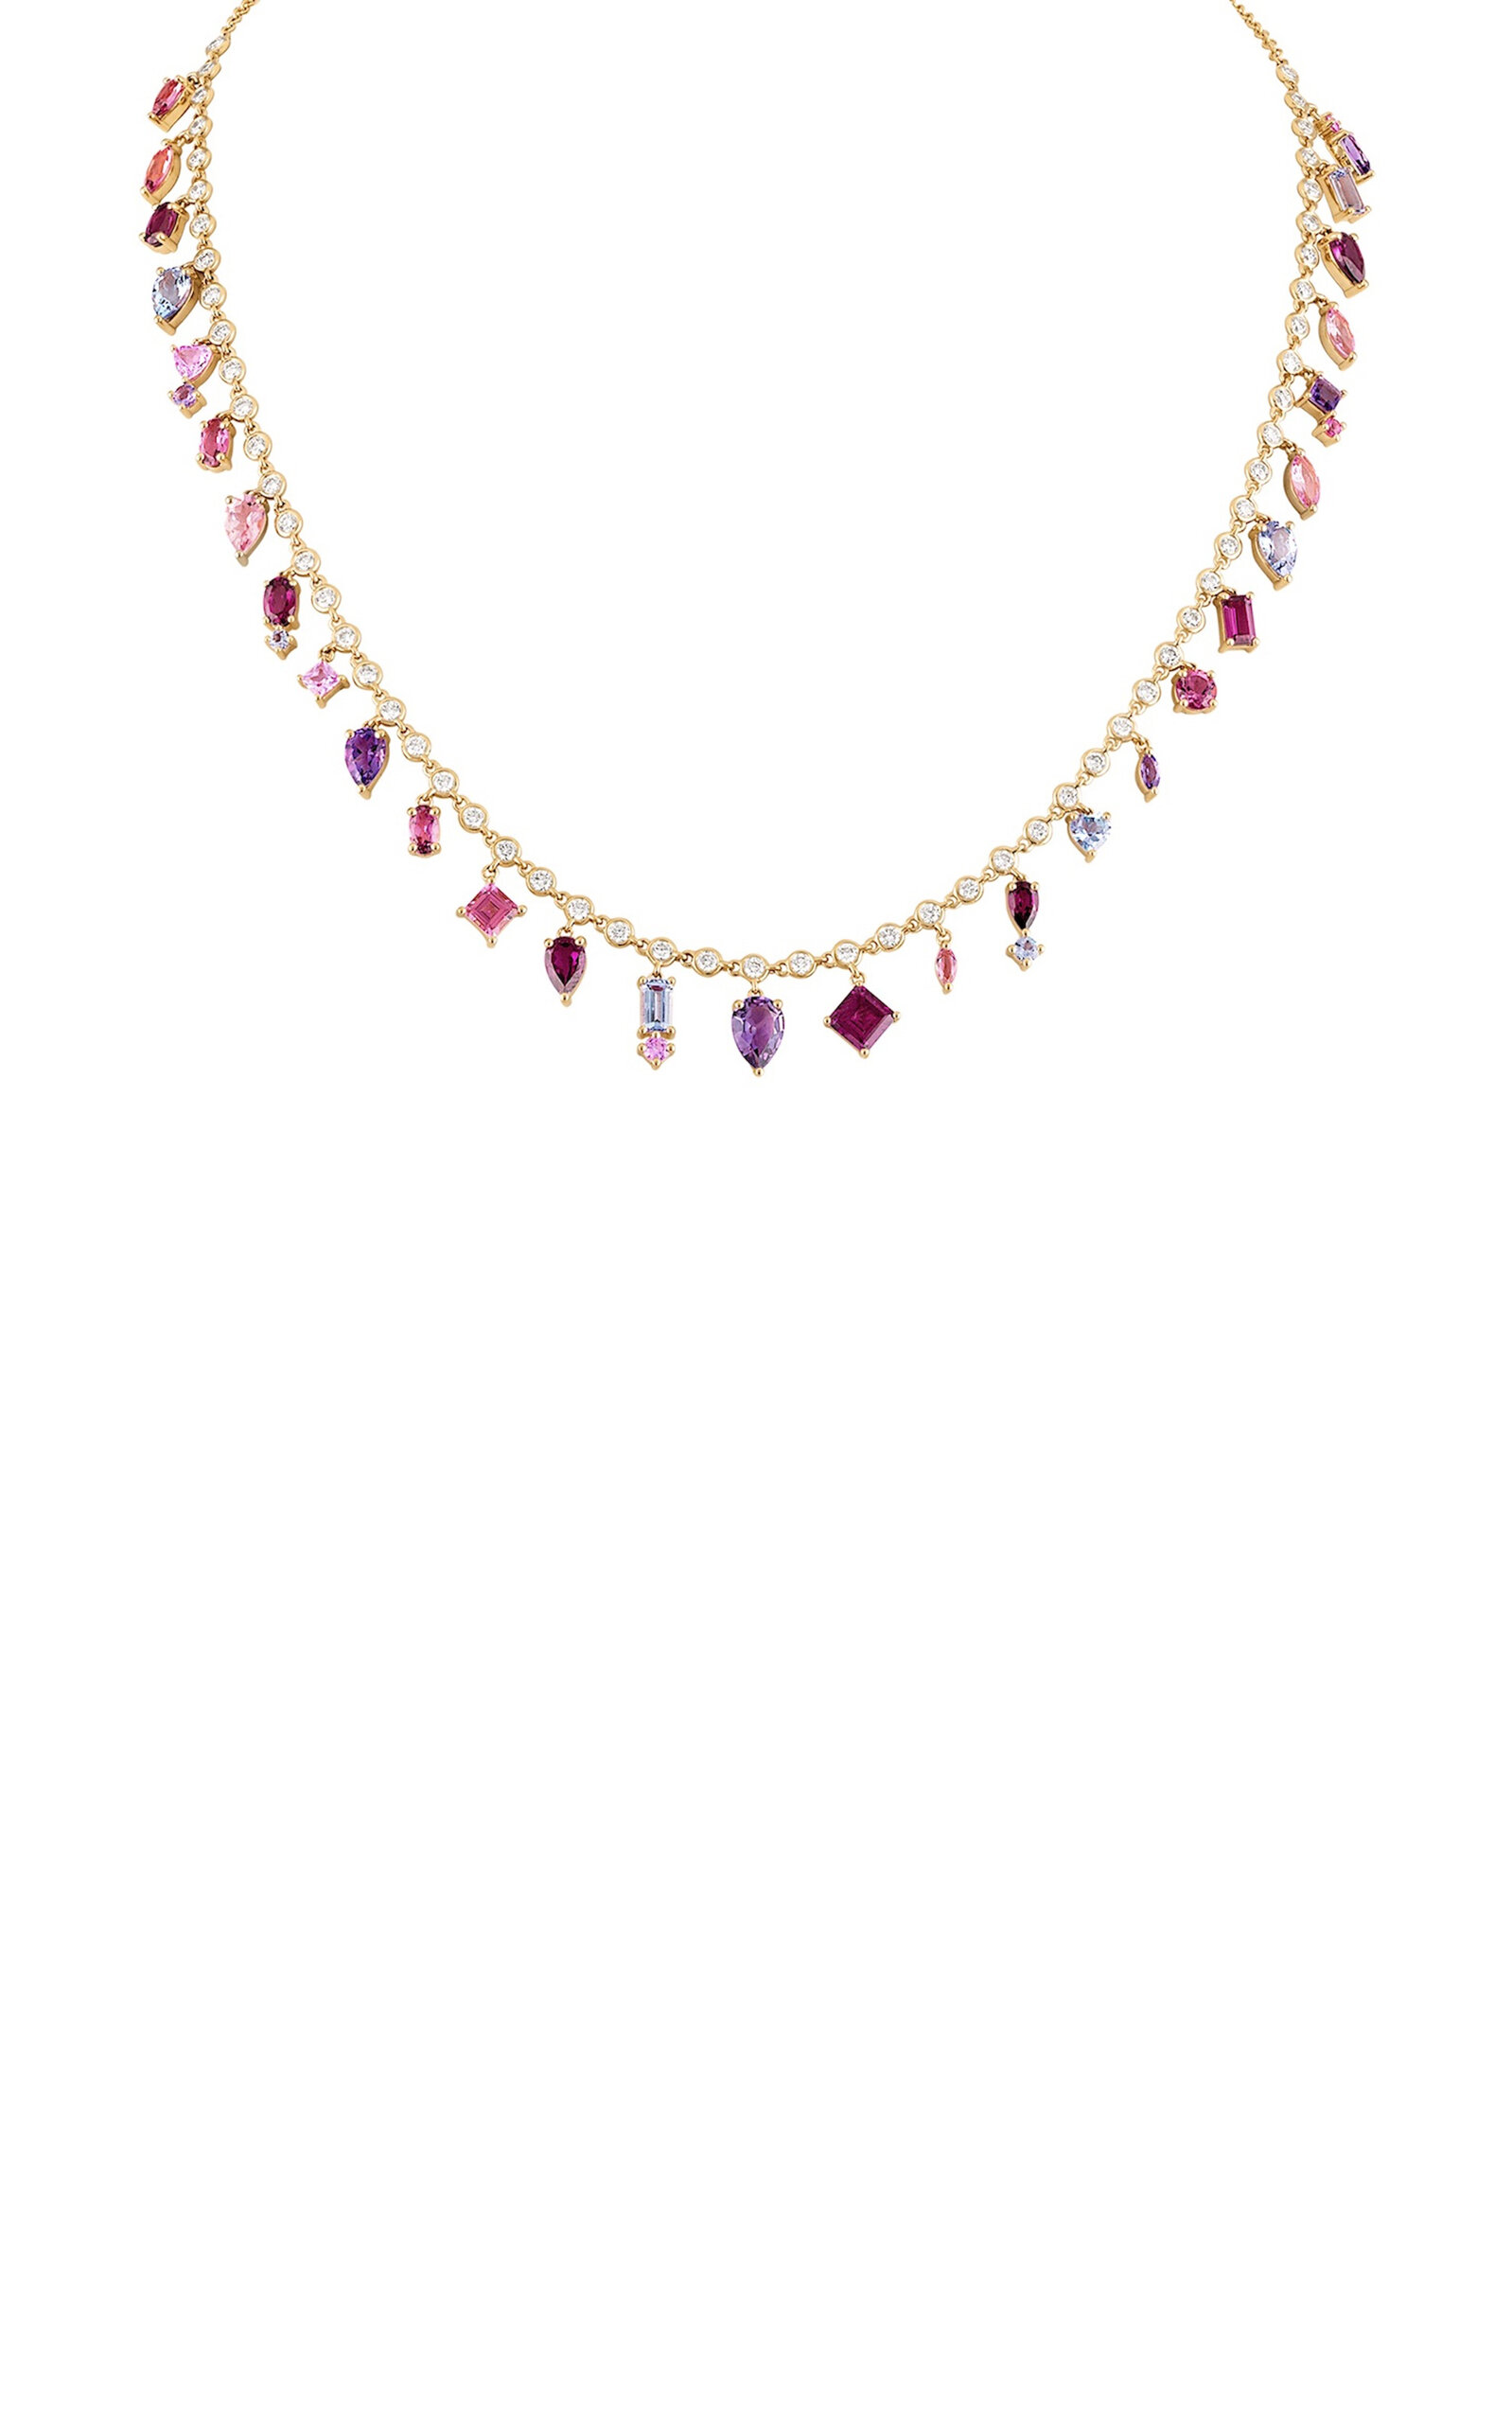 Shades of Pink 14K Yellow Gold Necklace